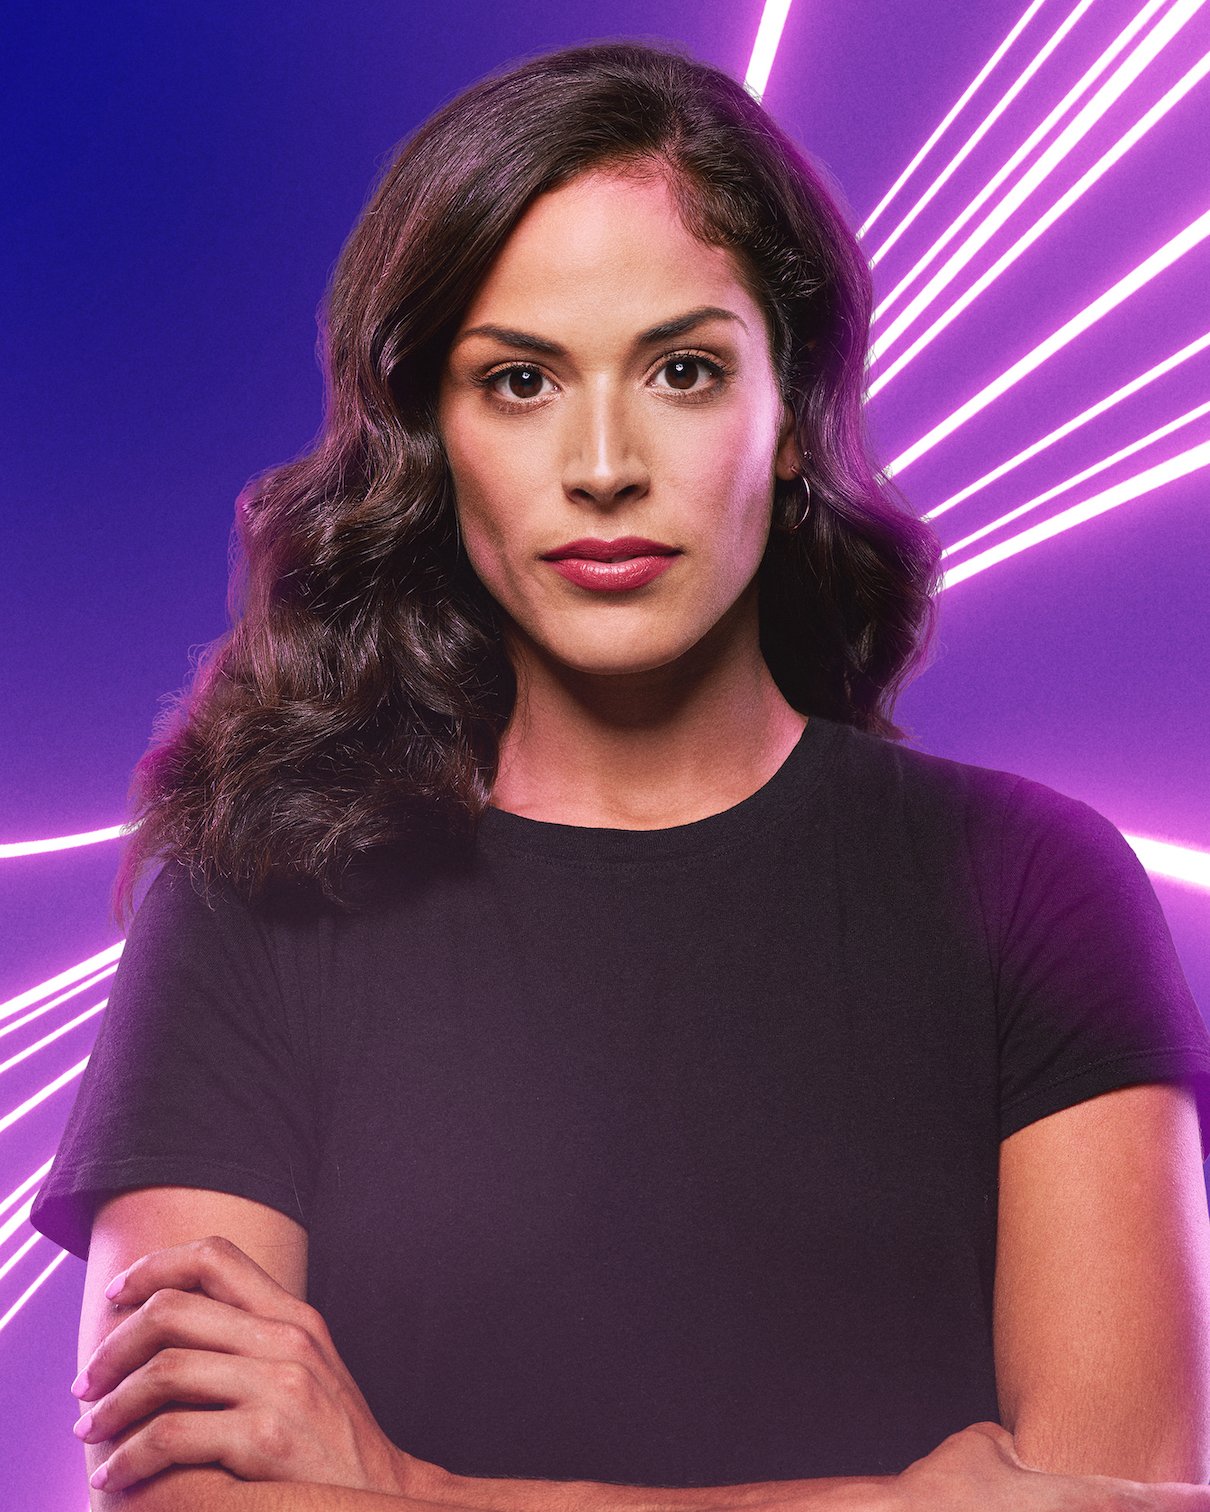 Nany González from 'The Challenge' Season 38 against a purple background